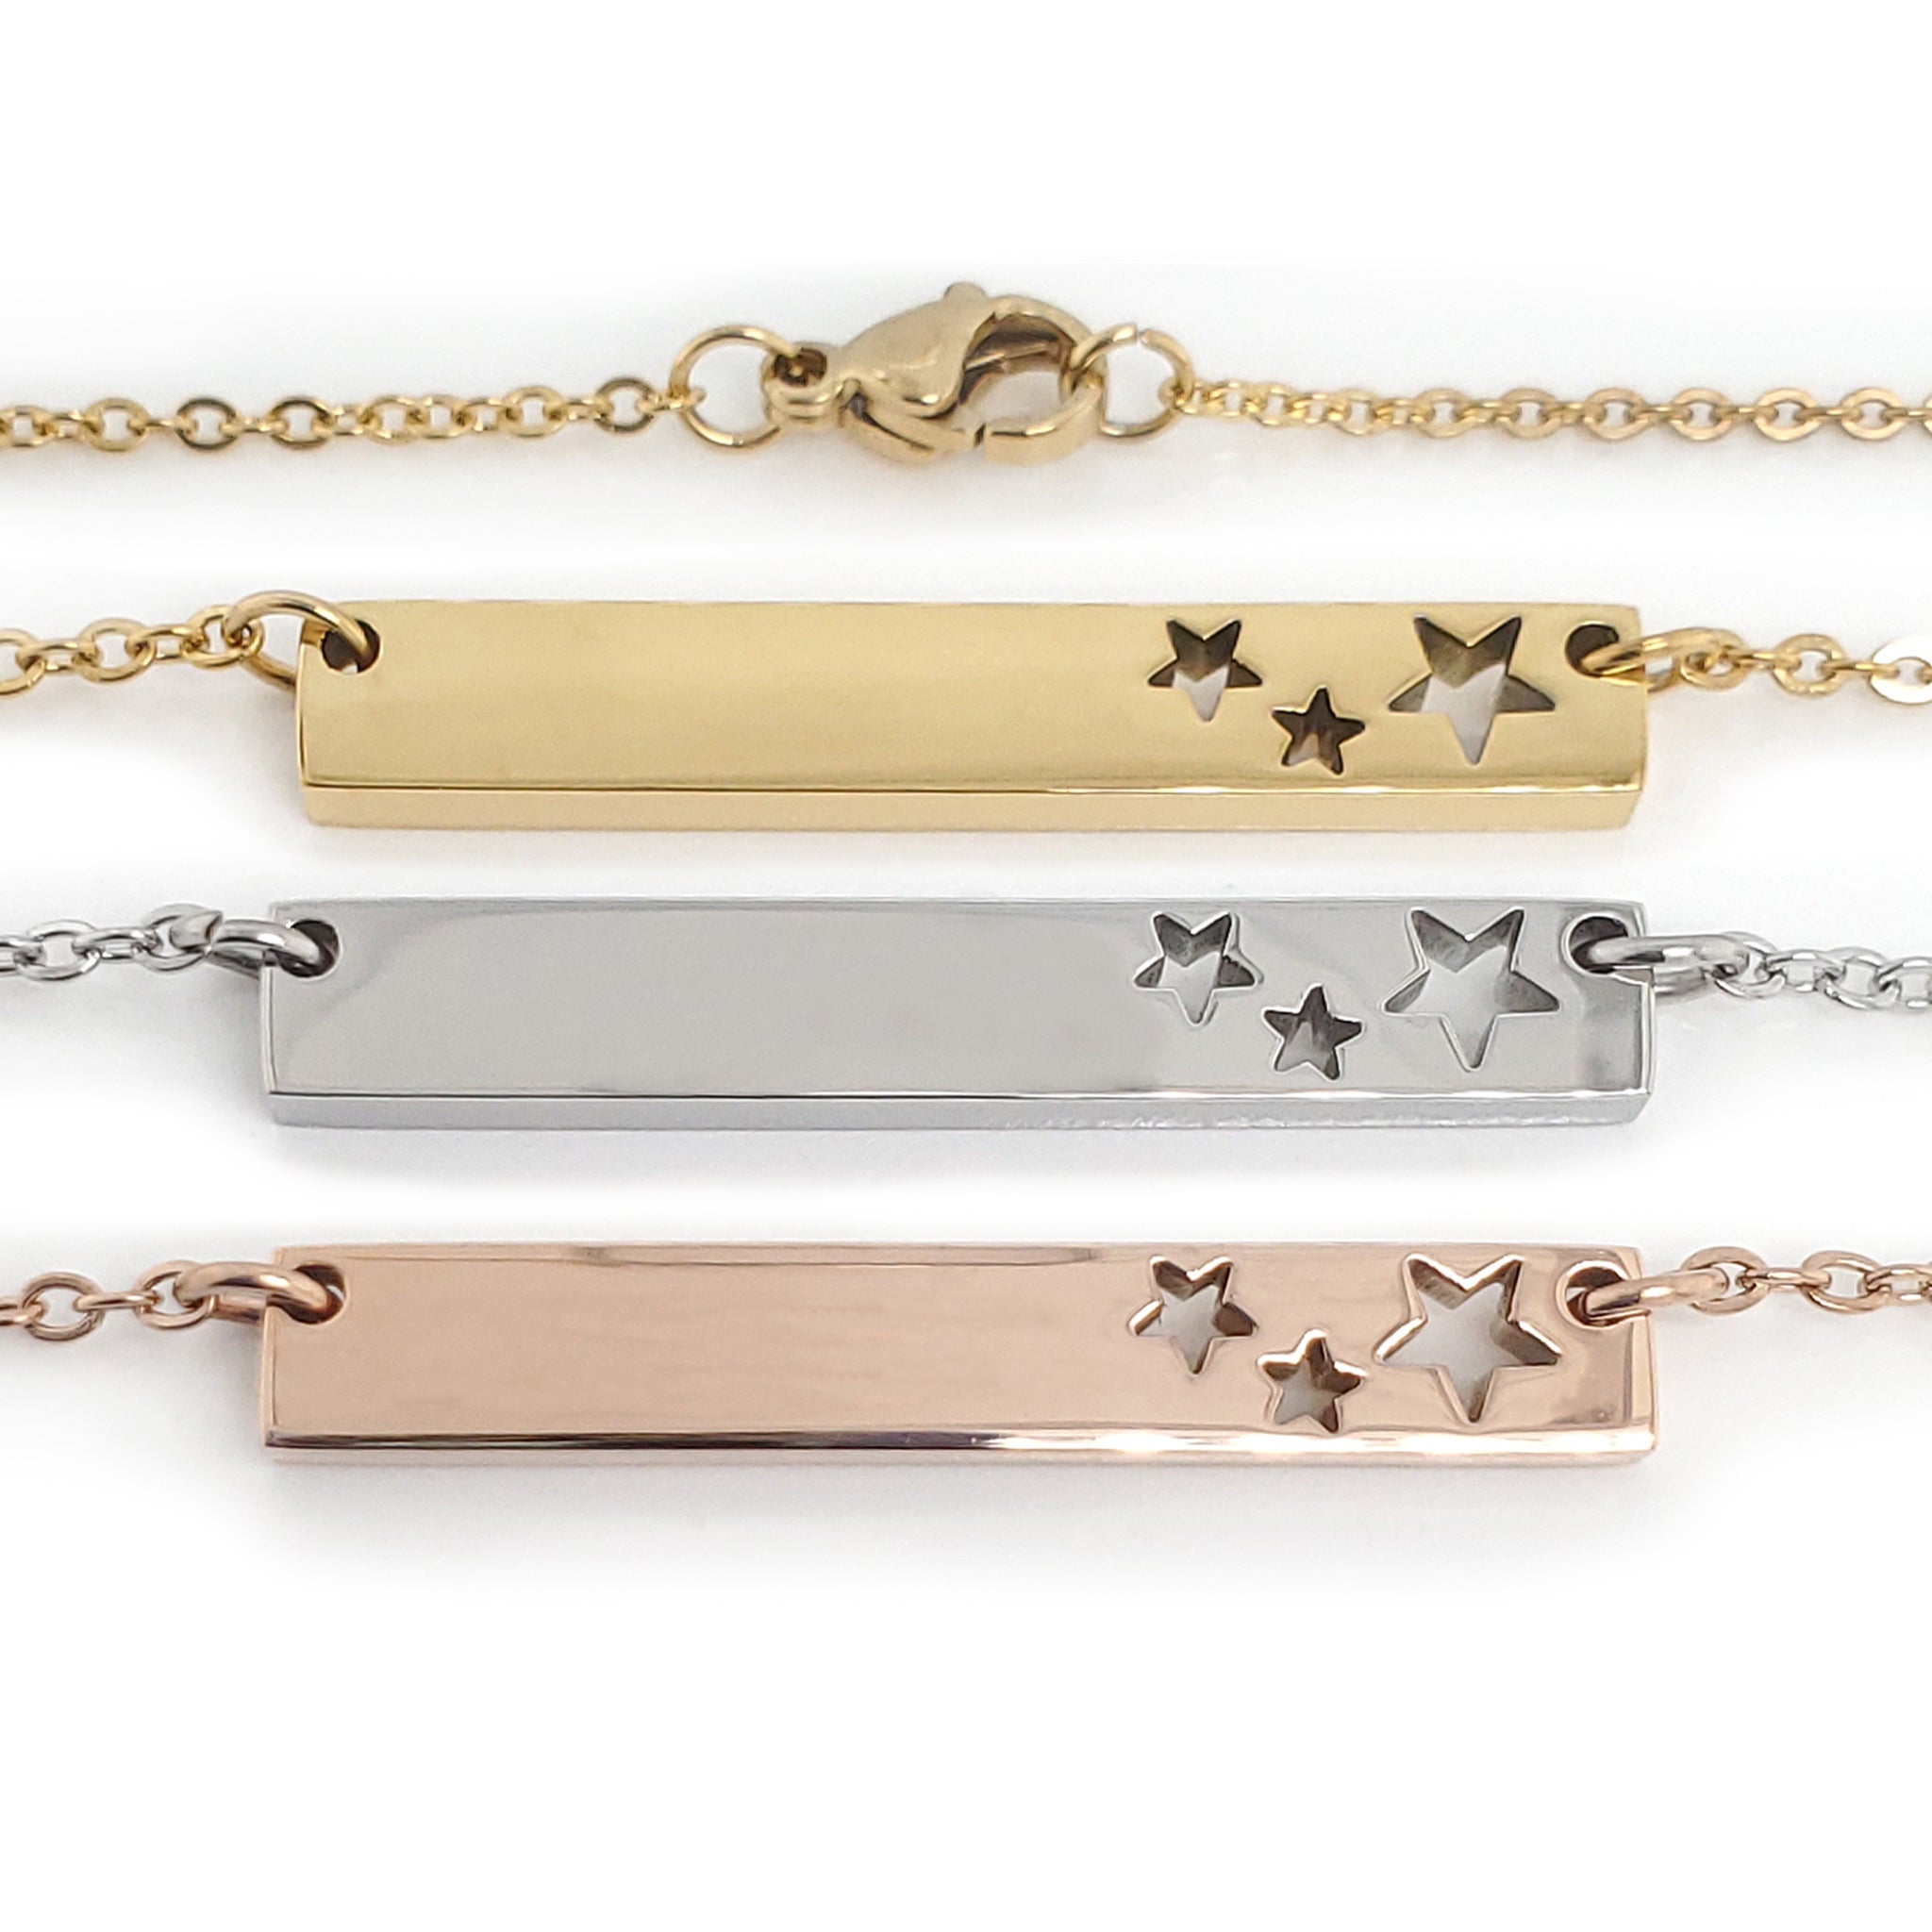 Stars cutout horizontal stainless steel bar necklaces in gold dipped, stainless steel color, and rose gold dipped.